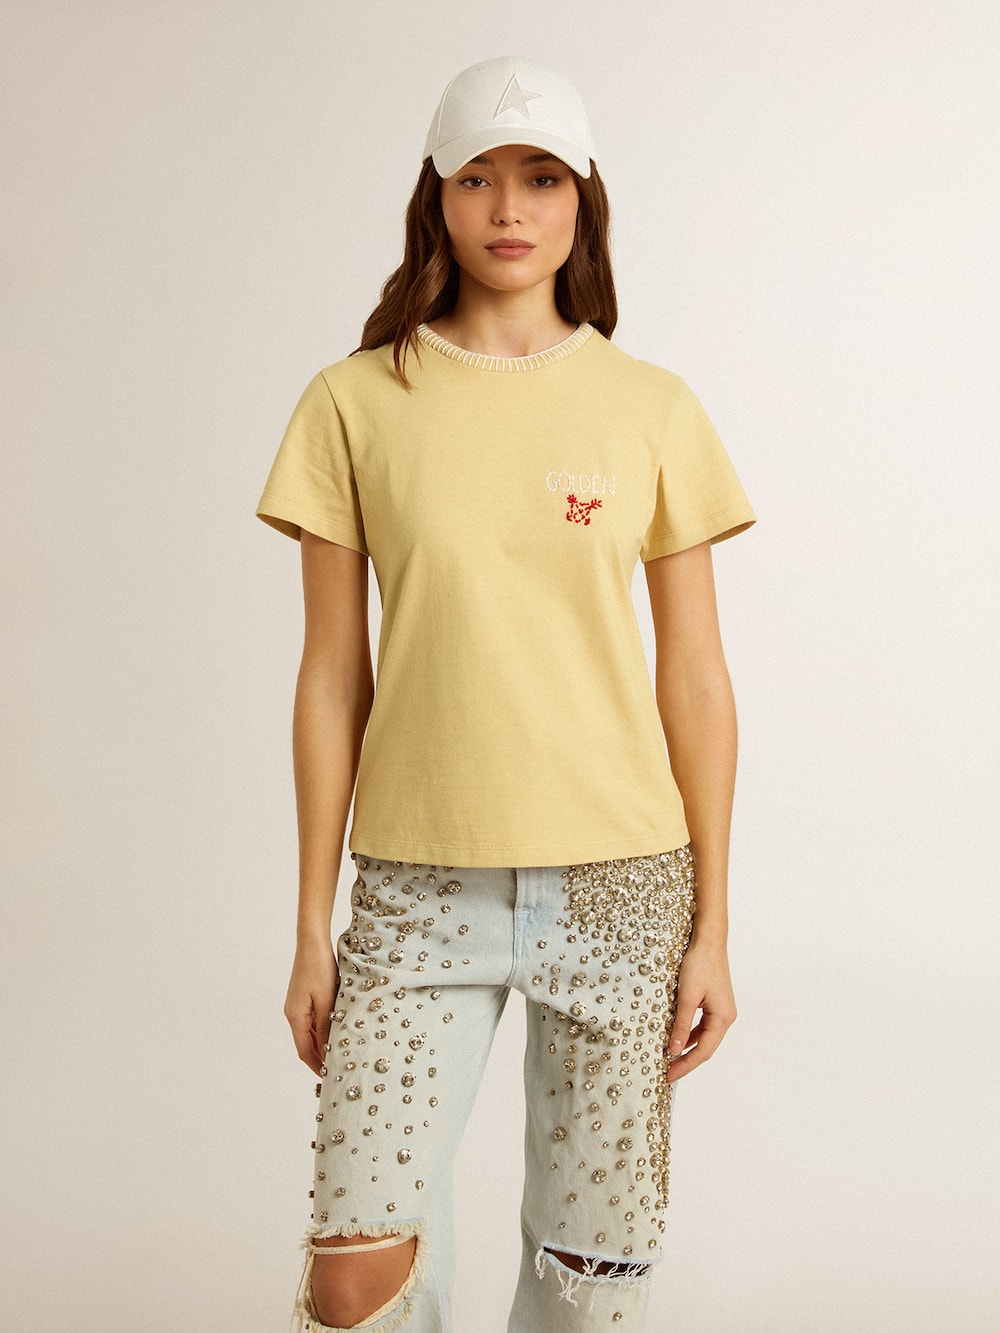 Golden Goose - Women's T-shirt in cotton jersey with embroidery on the neck and heart in 